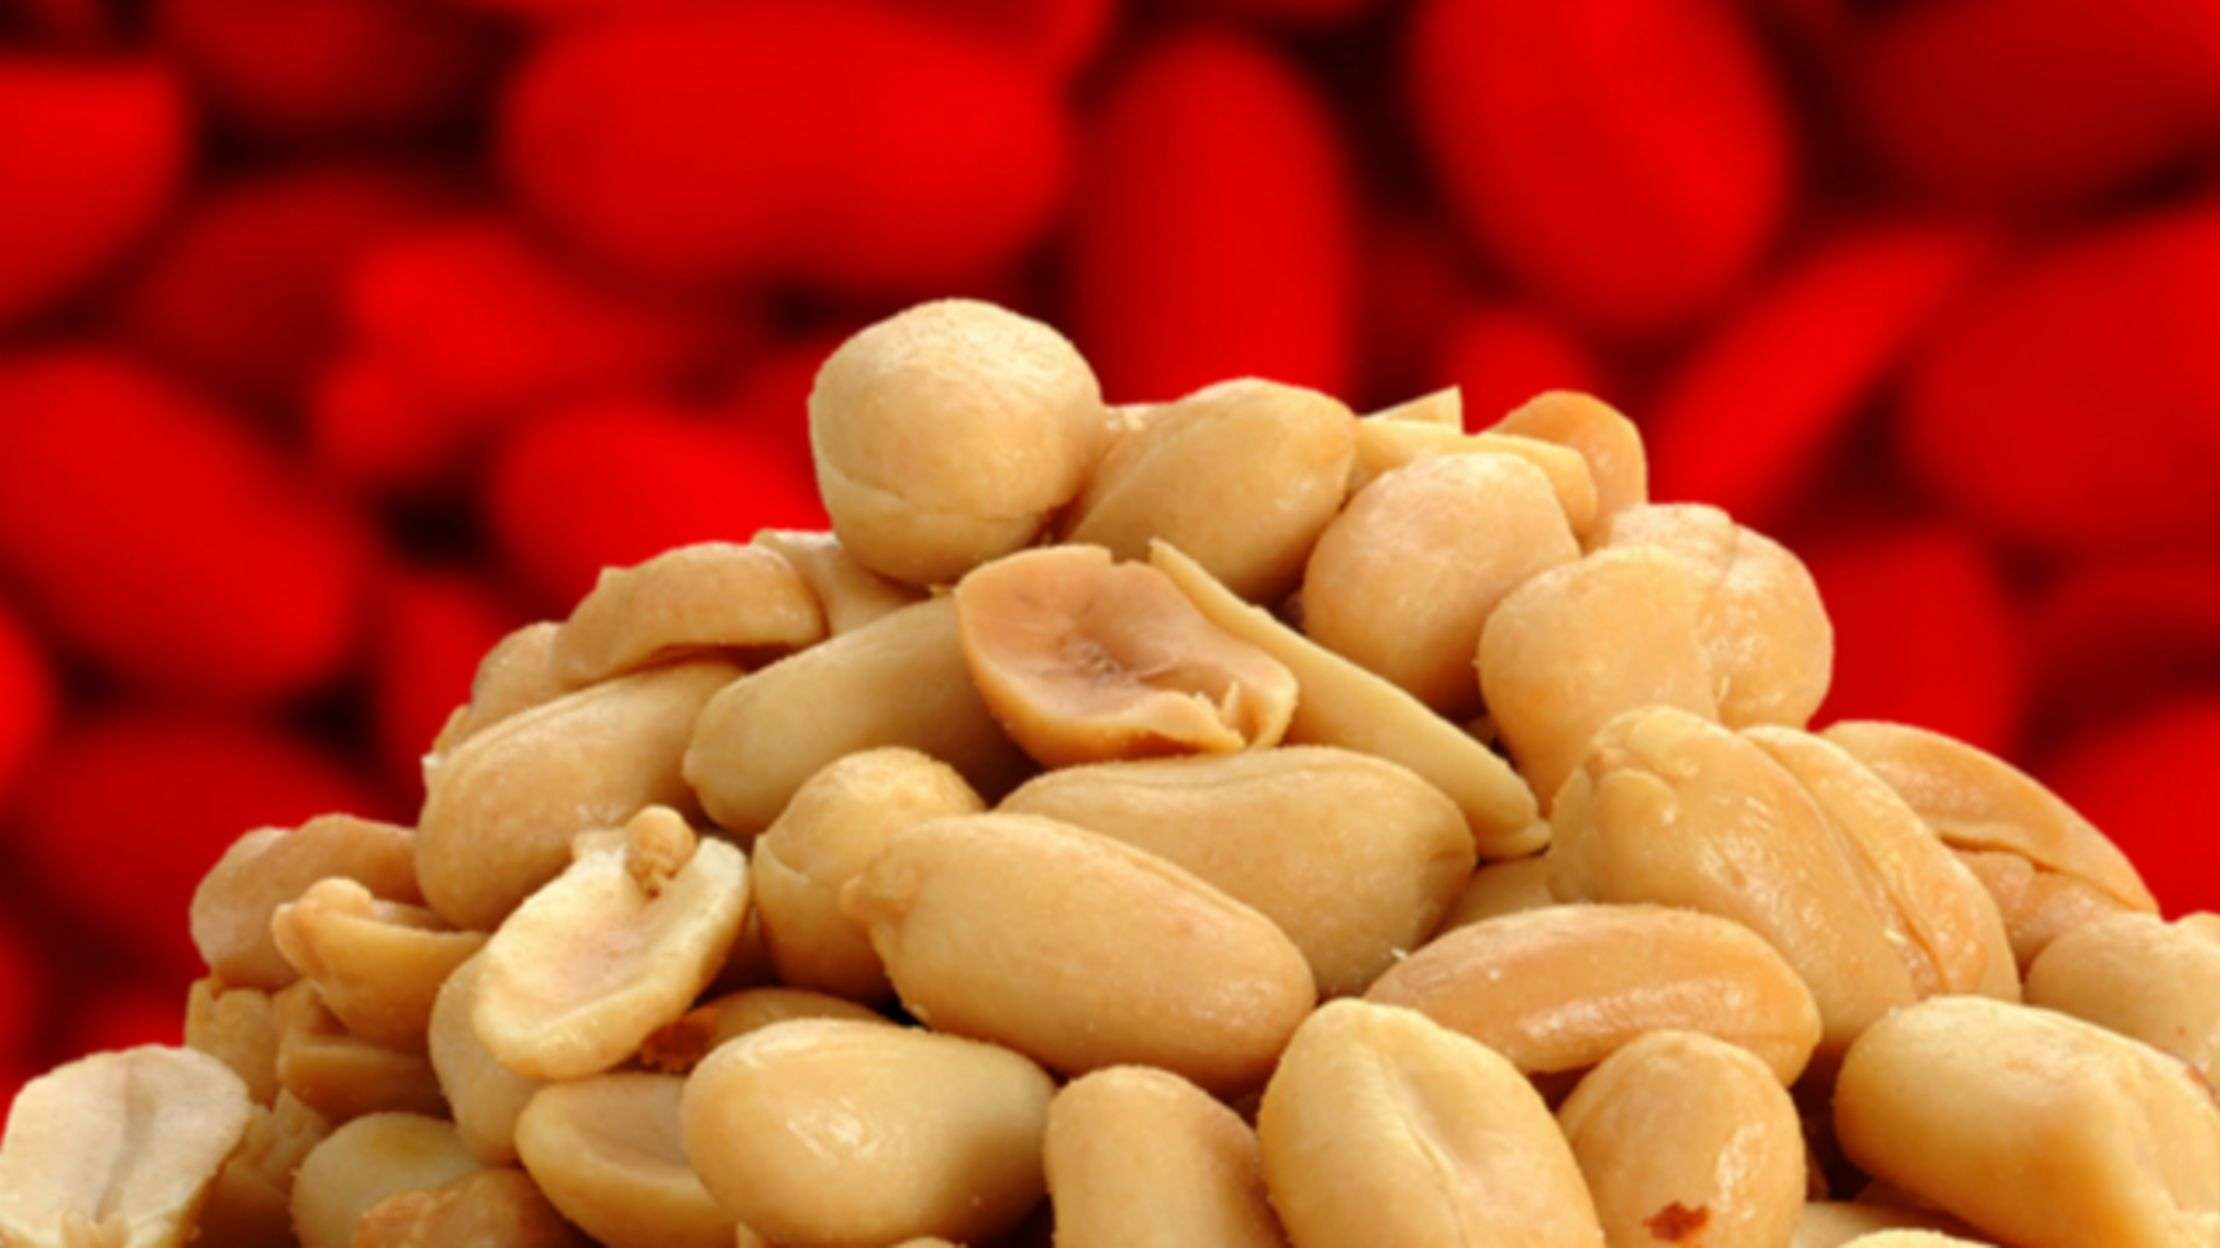 What Has Caused the Rise in Peanut Allergies?